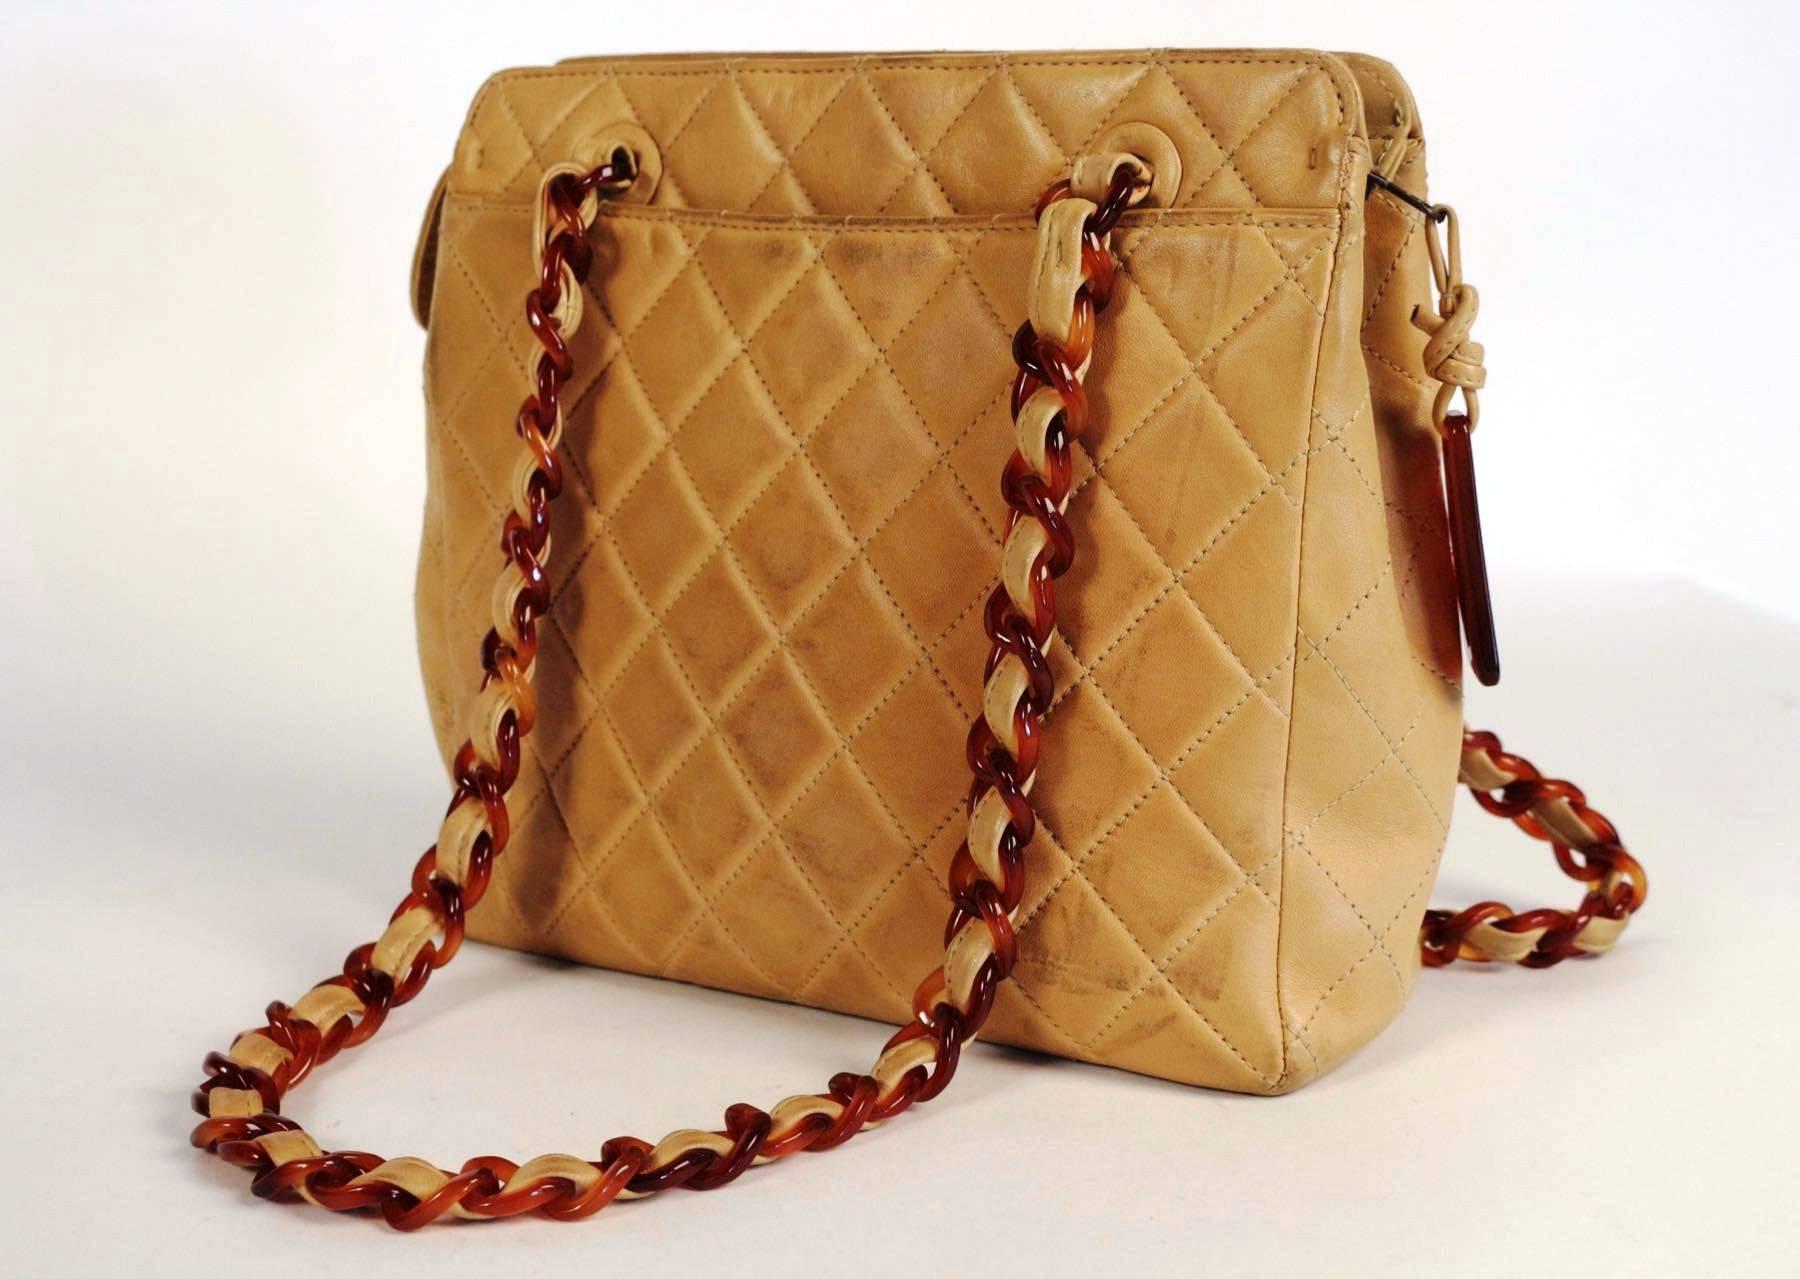 20th Century Chanel, Paris, Quilted Cream Leather Bag